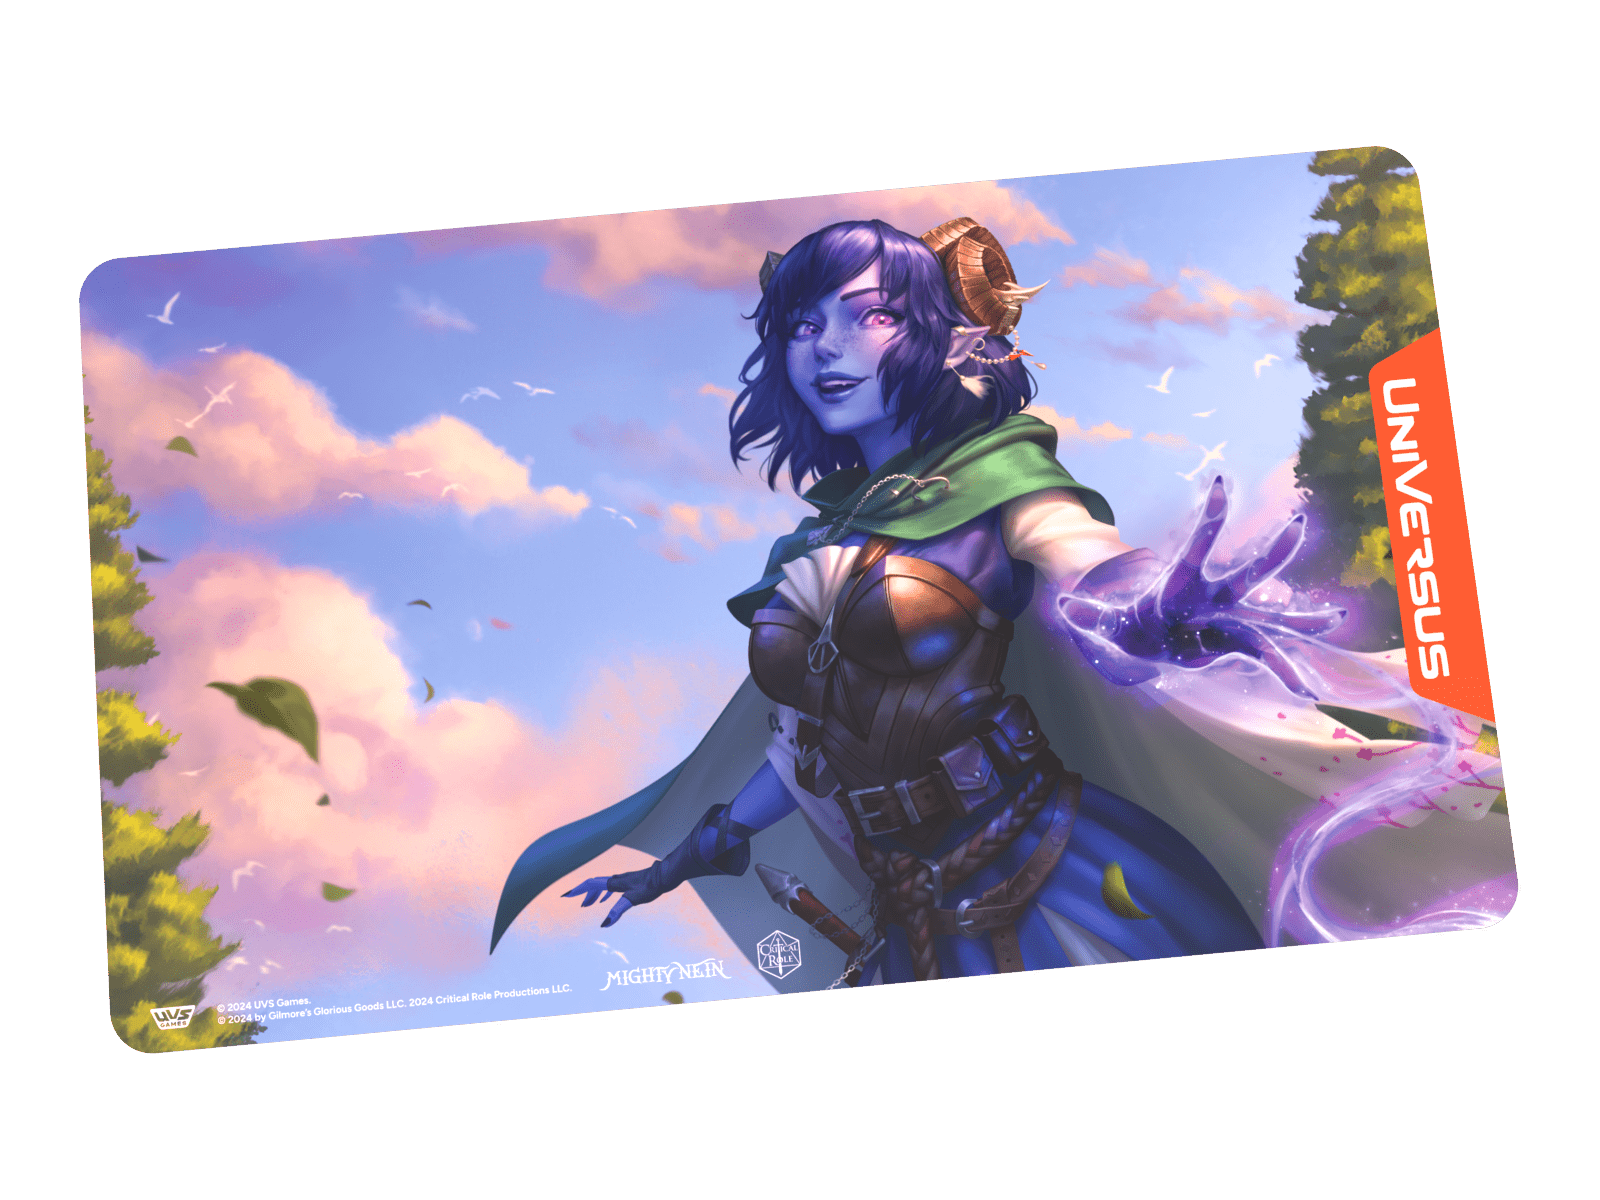 Jester - Critical Role Mighty Nein Playmat - Awesome Deals Deluxe